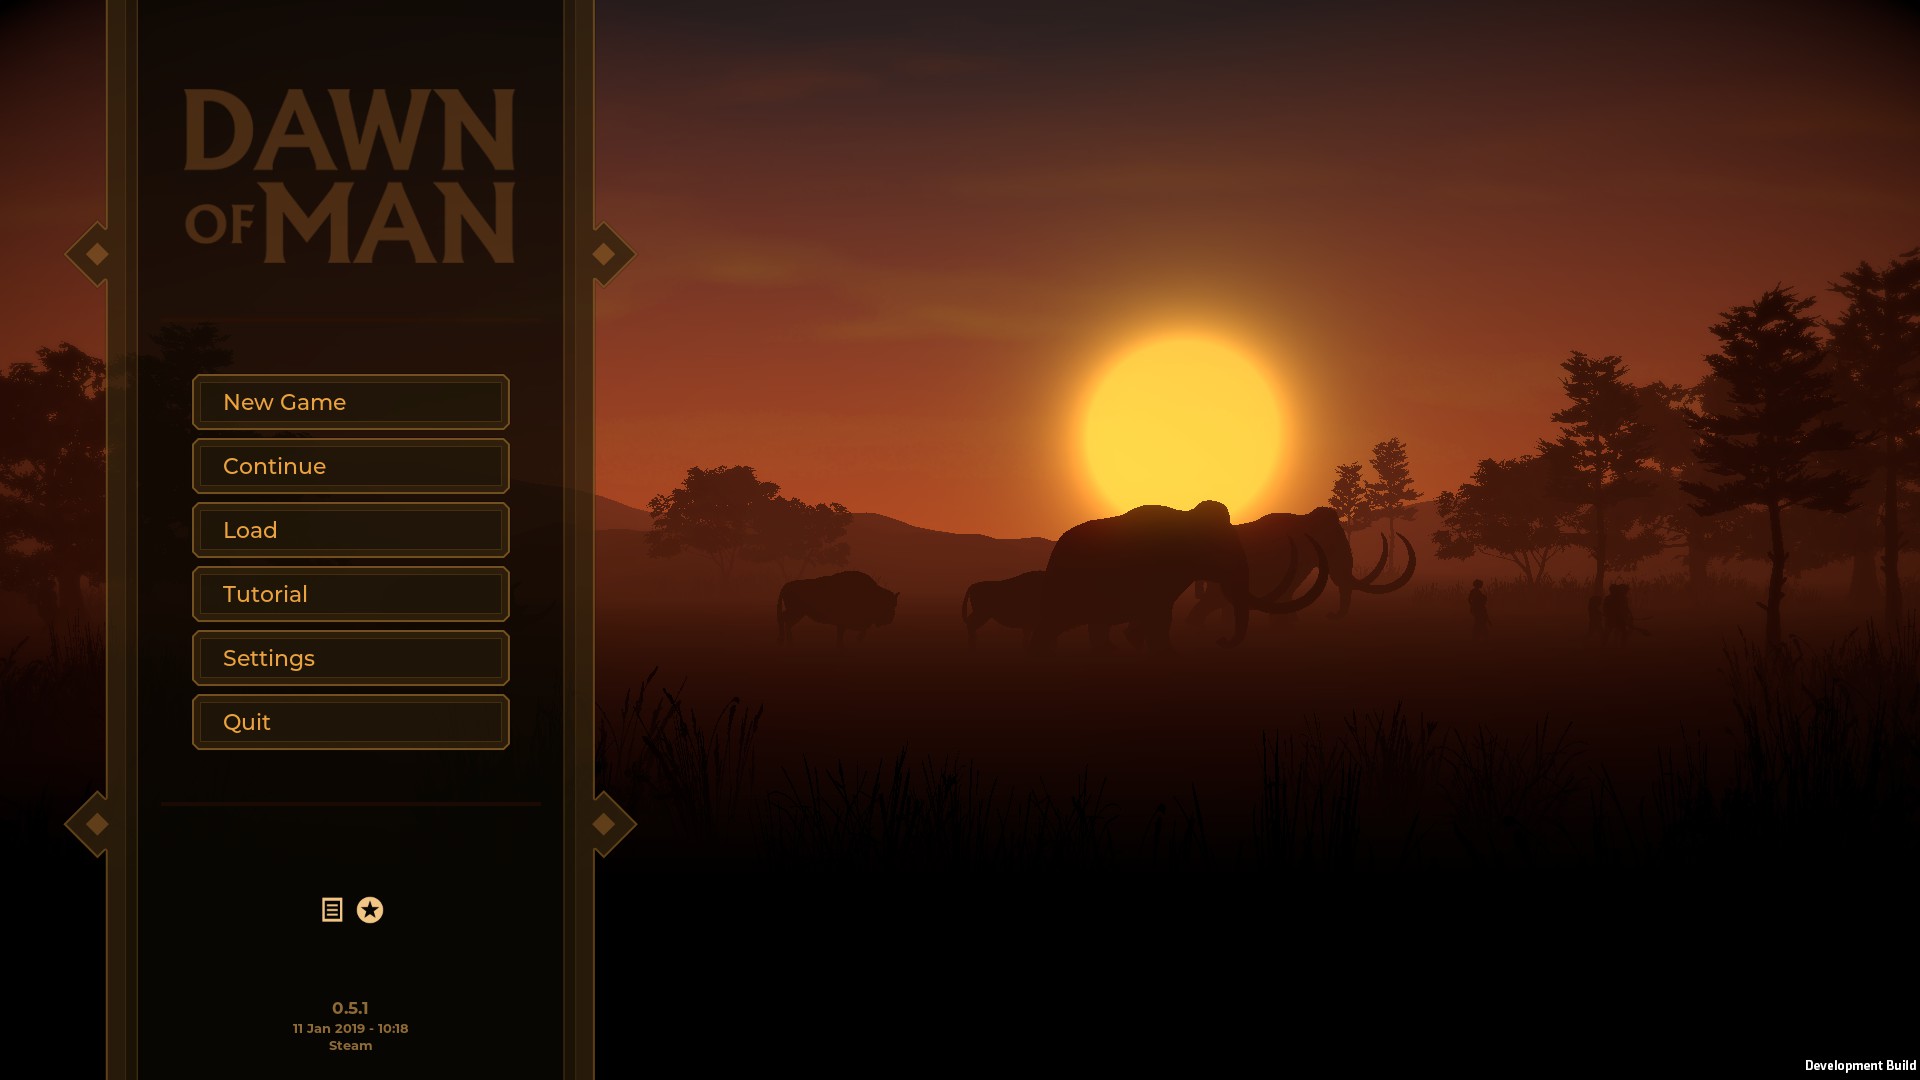 Preview: Dawn of Man